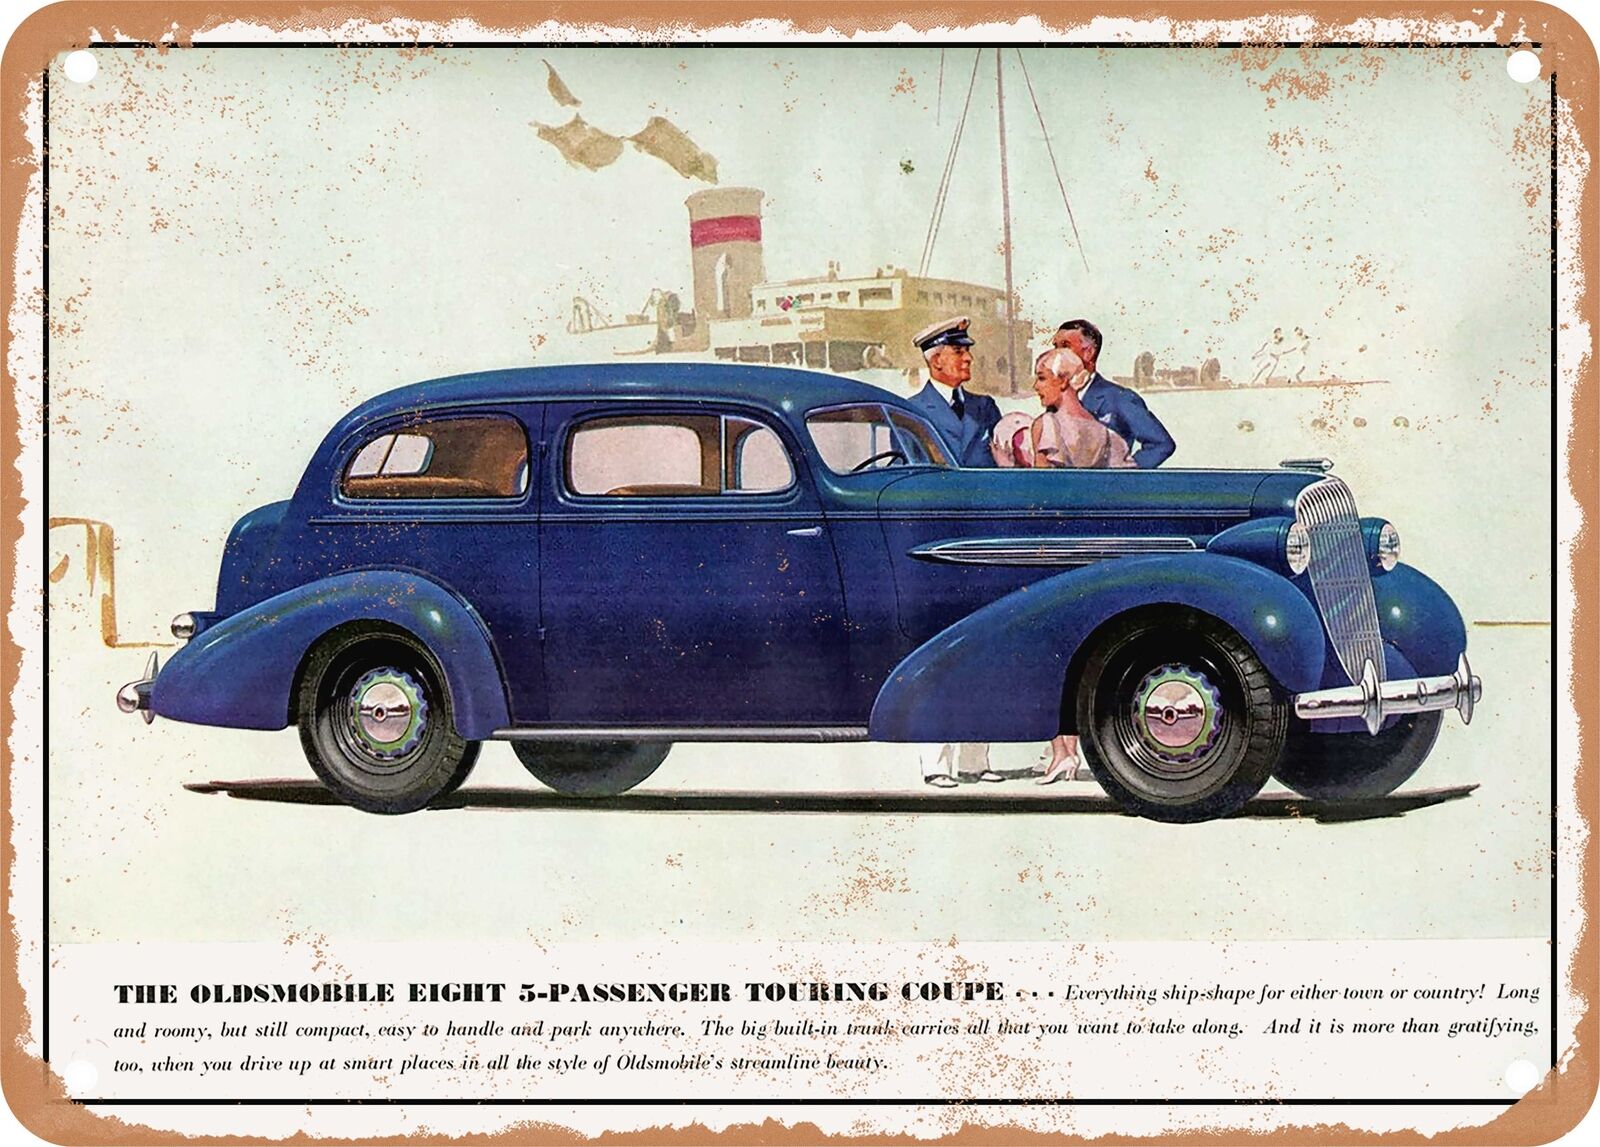 METAL SIGN - 1935 Oldsmobile Eight 5 Passenger Touring Coupe Vintage Ad